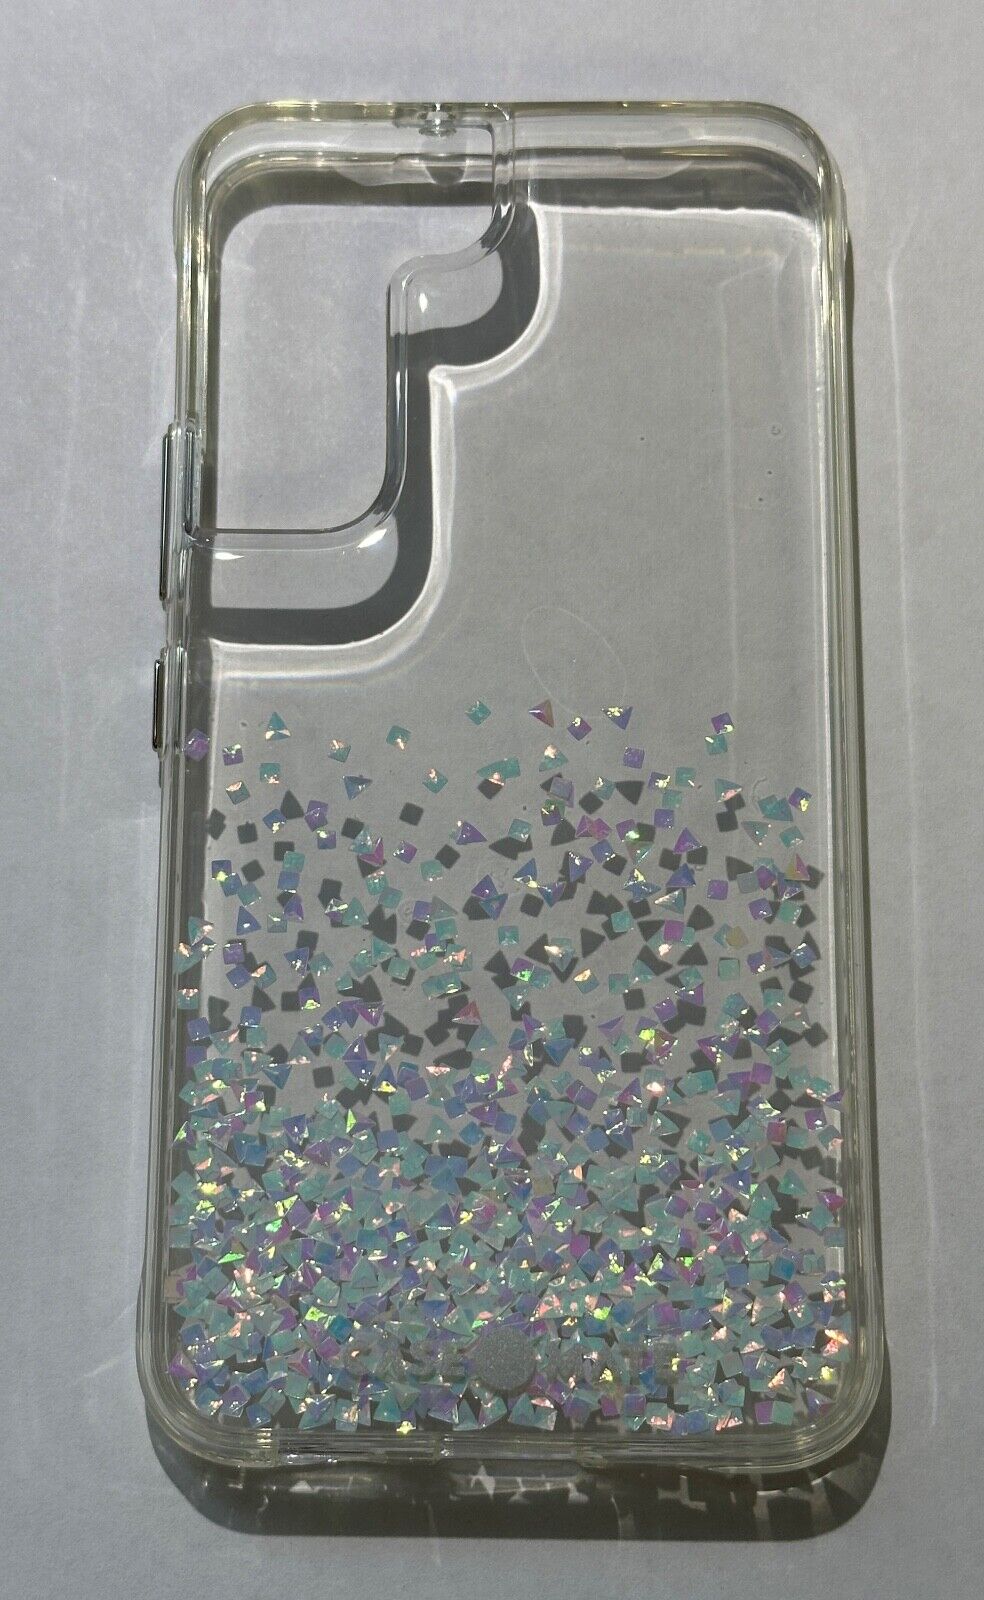 Open Box Case-Mate Twinkle Diamond Ombre Case for Samsung Galaxy S22 (6.1")